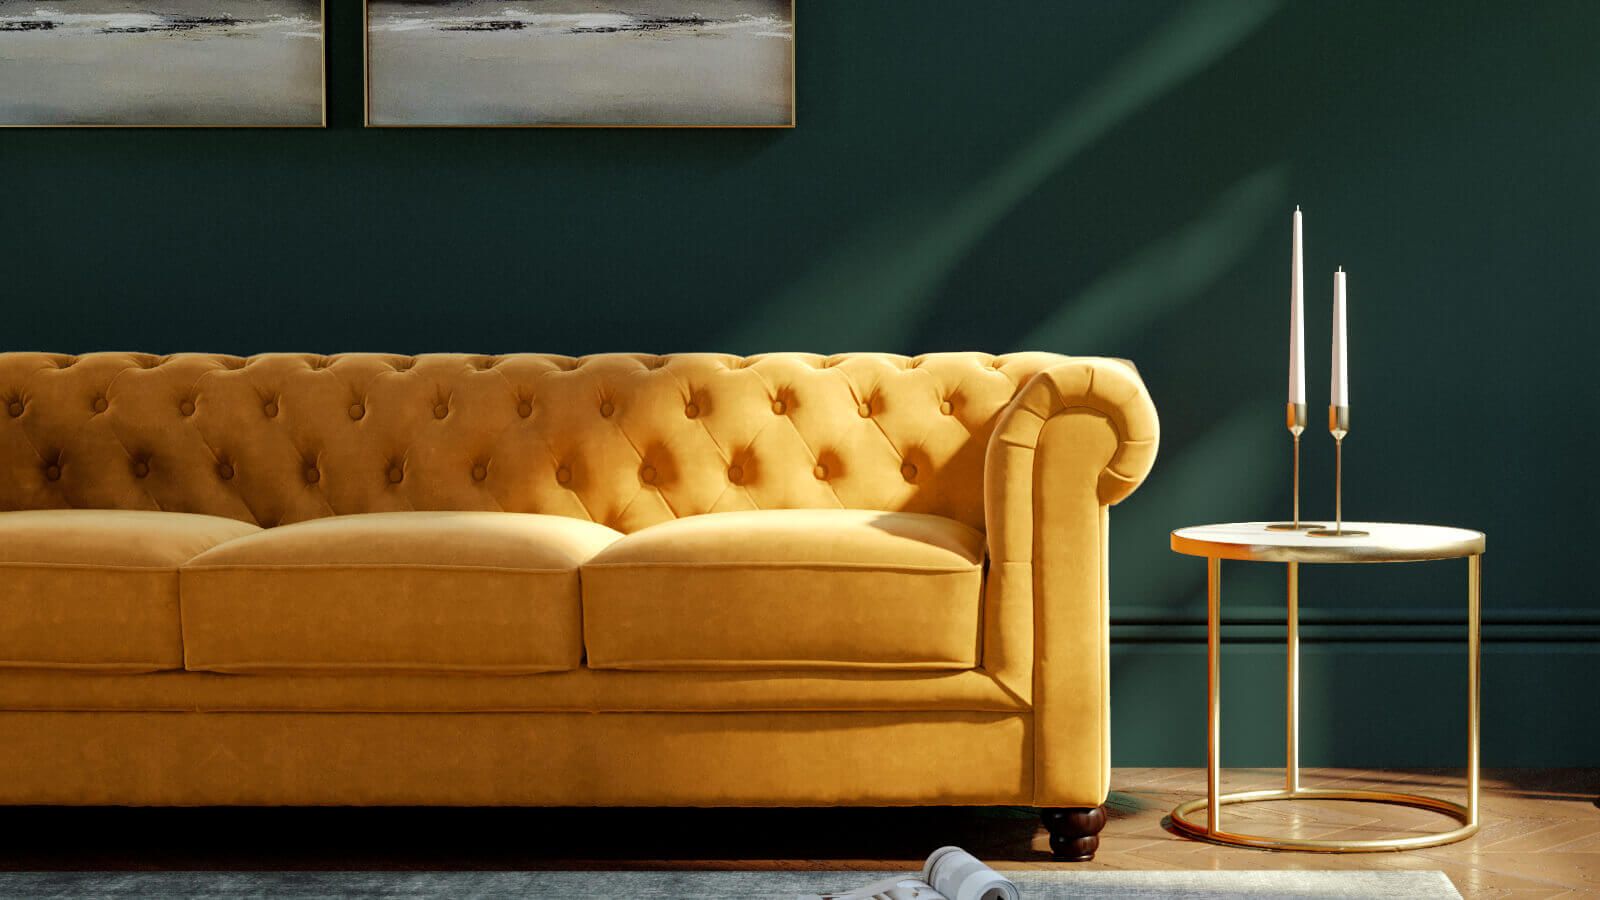 Furniture And Choice announce exclusive limited drop of mustard Hampton sofas